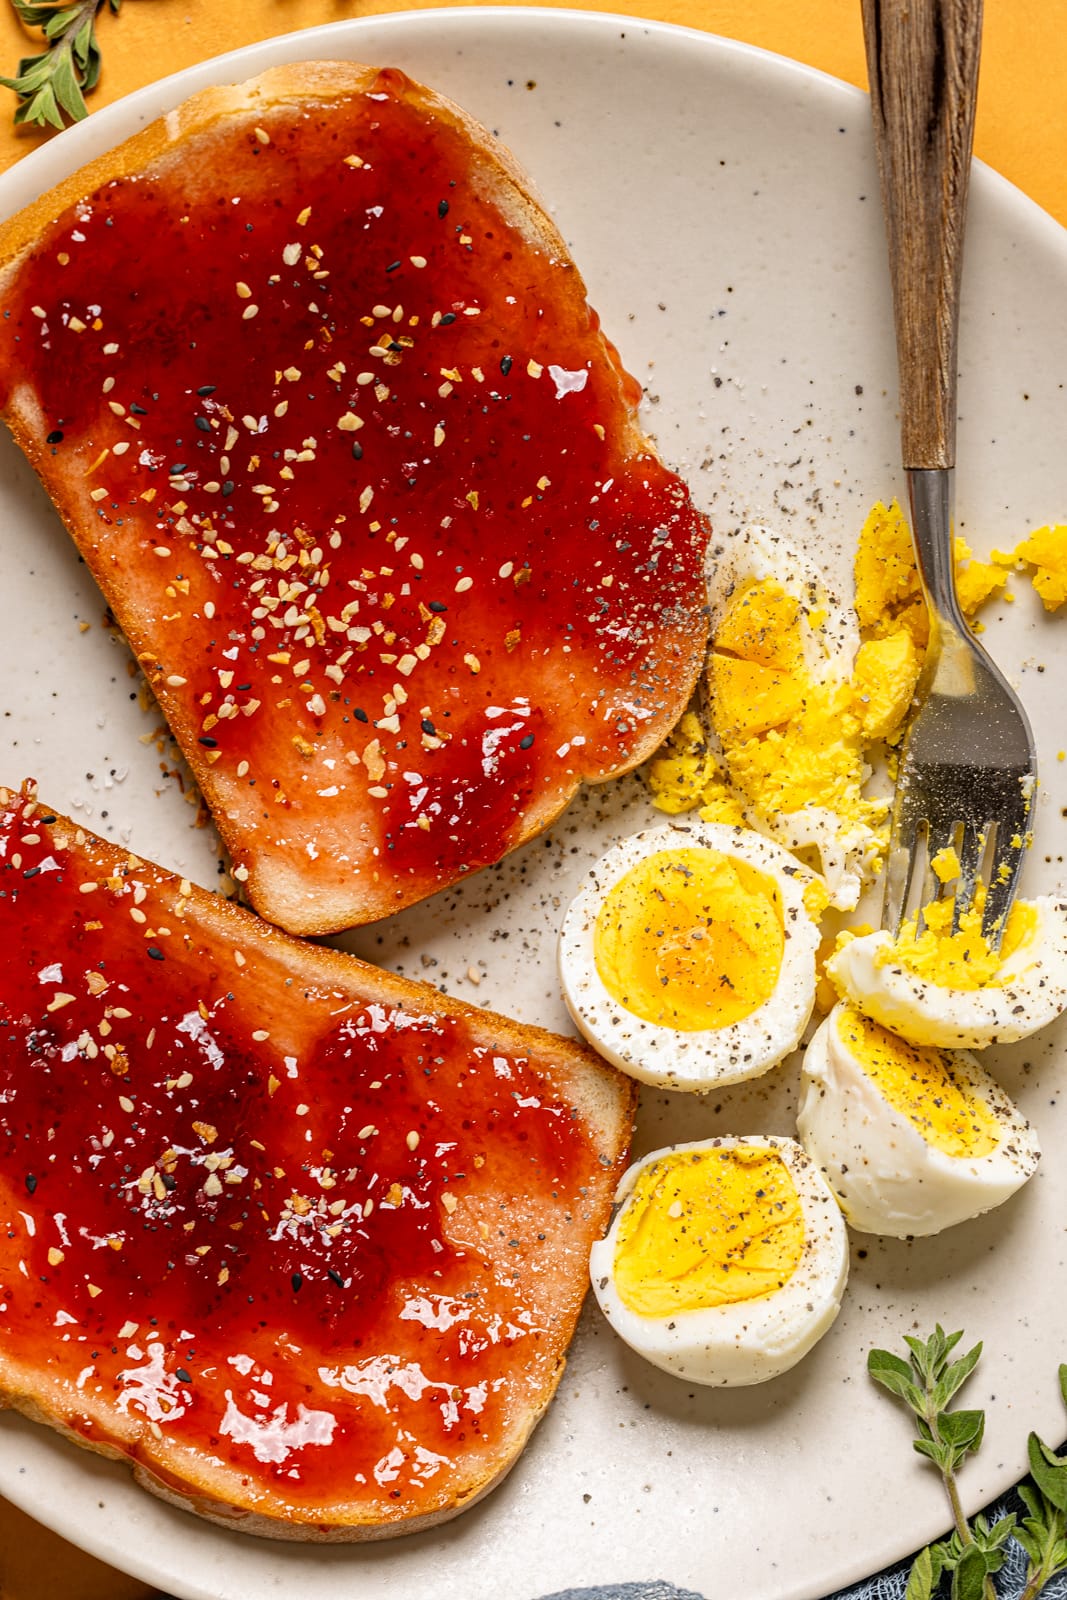 Hard boiled eggs on a plate with jelly toast and a fork.